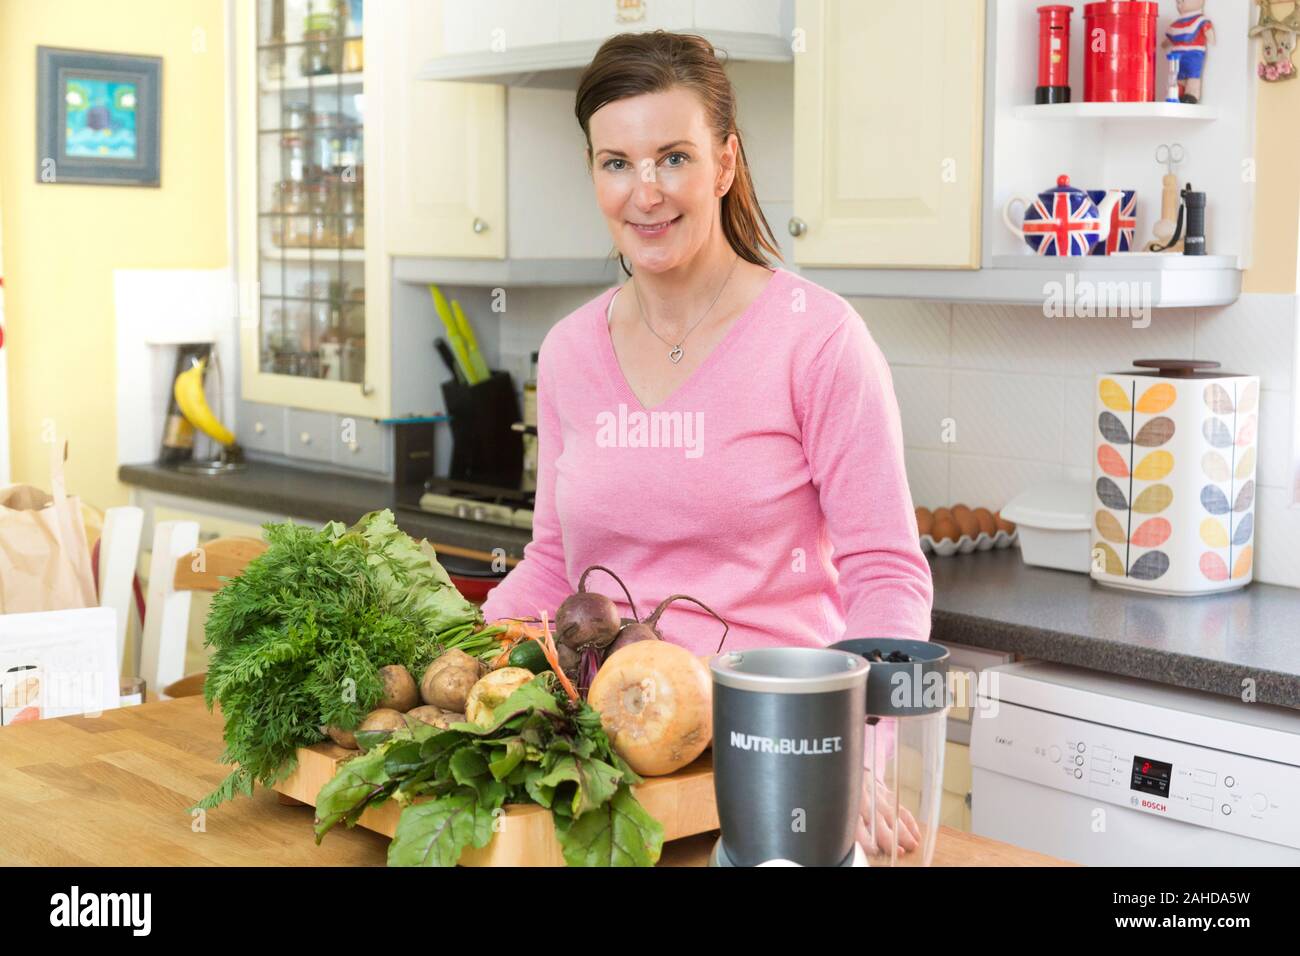 woman with fresh natural organic foods and  nutribullet in kitchen Stock Photo